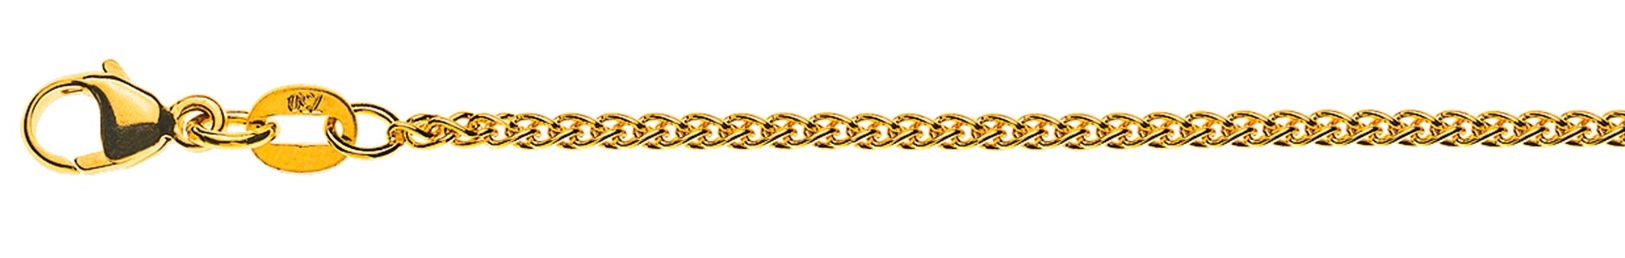 AURONOS Style Necklace yellow gold 9K cable chain 60cm 1.65mm